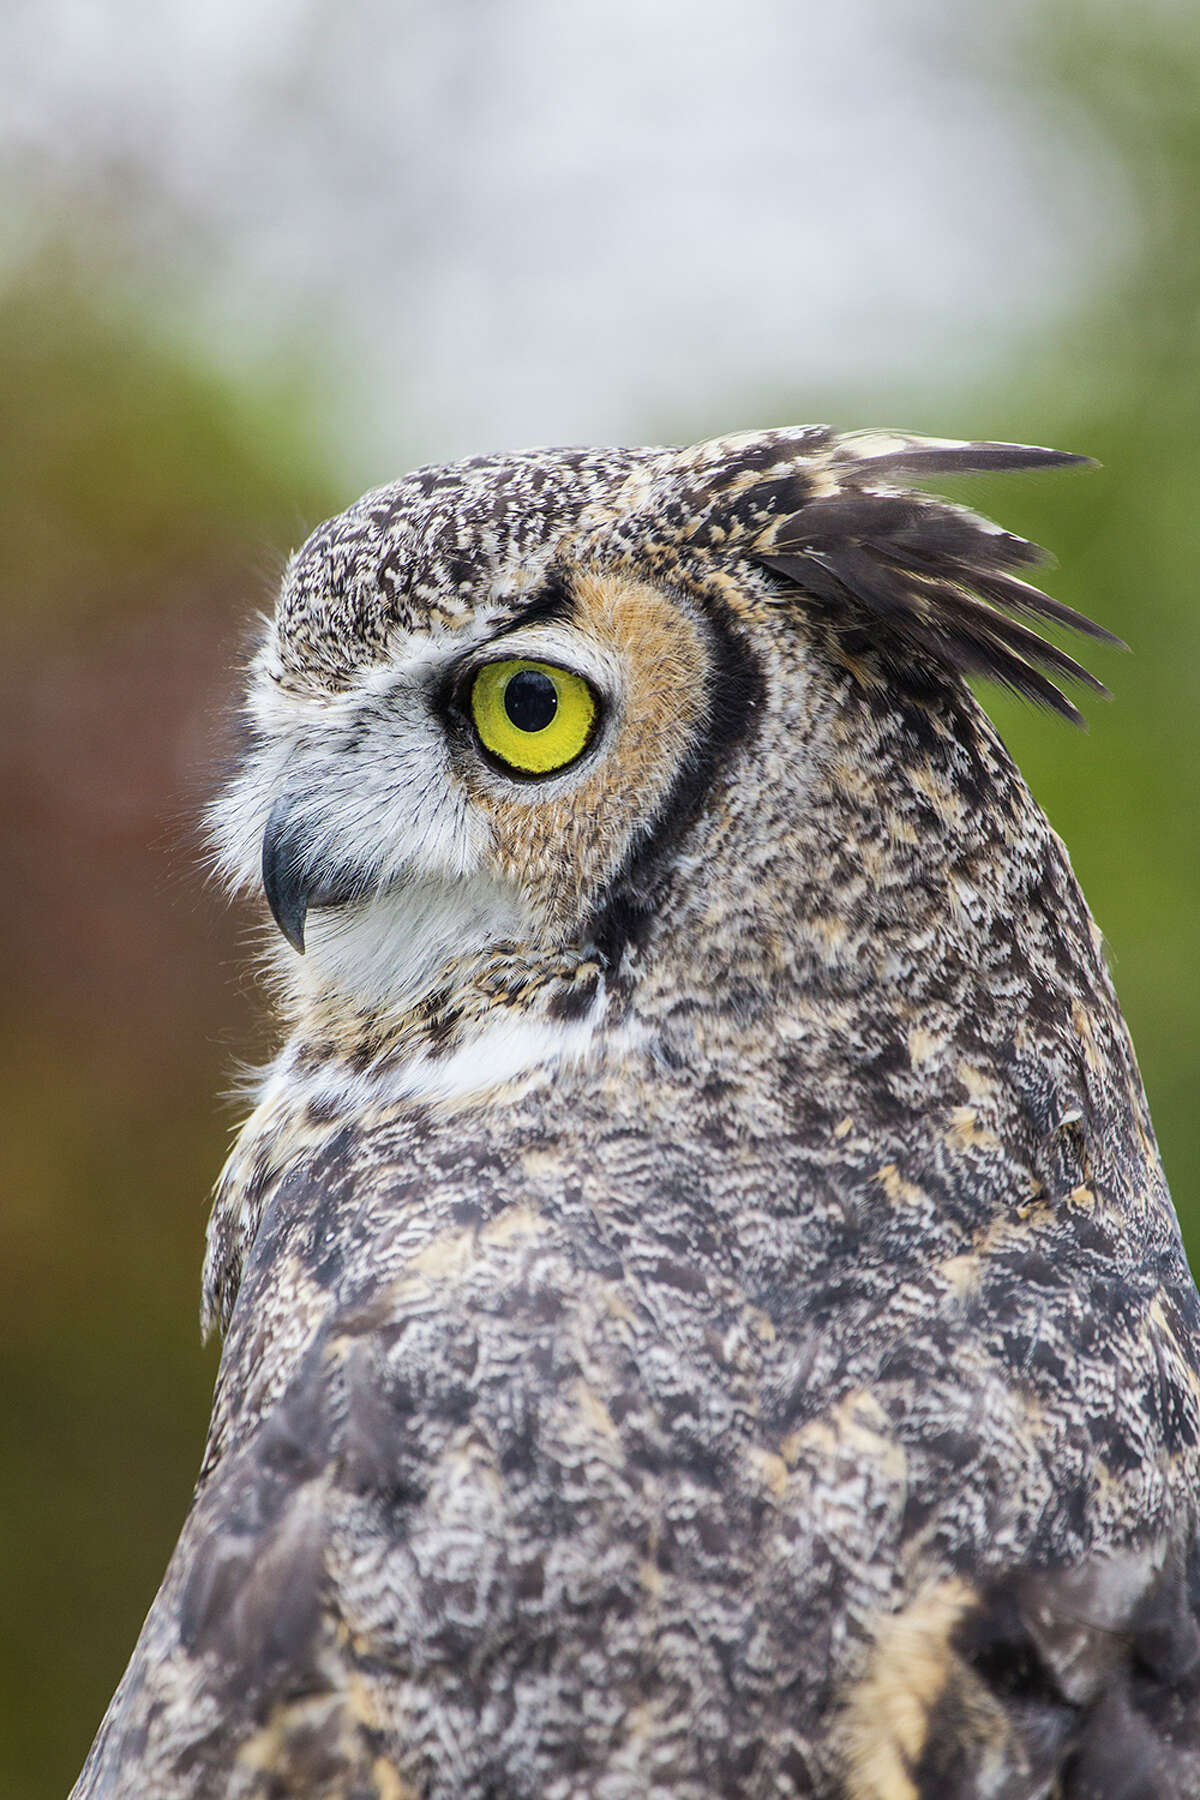 It's mating season for great horned owls﻿. You might hear them on New Year's Eve.